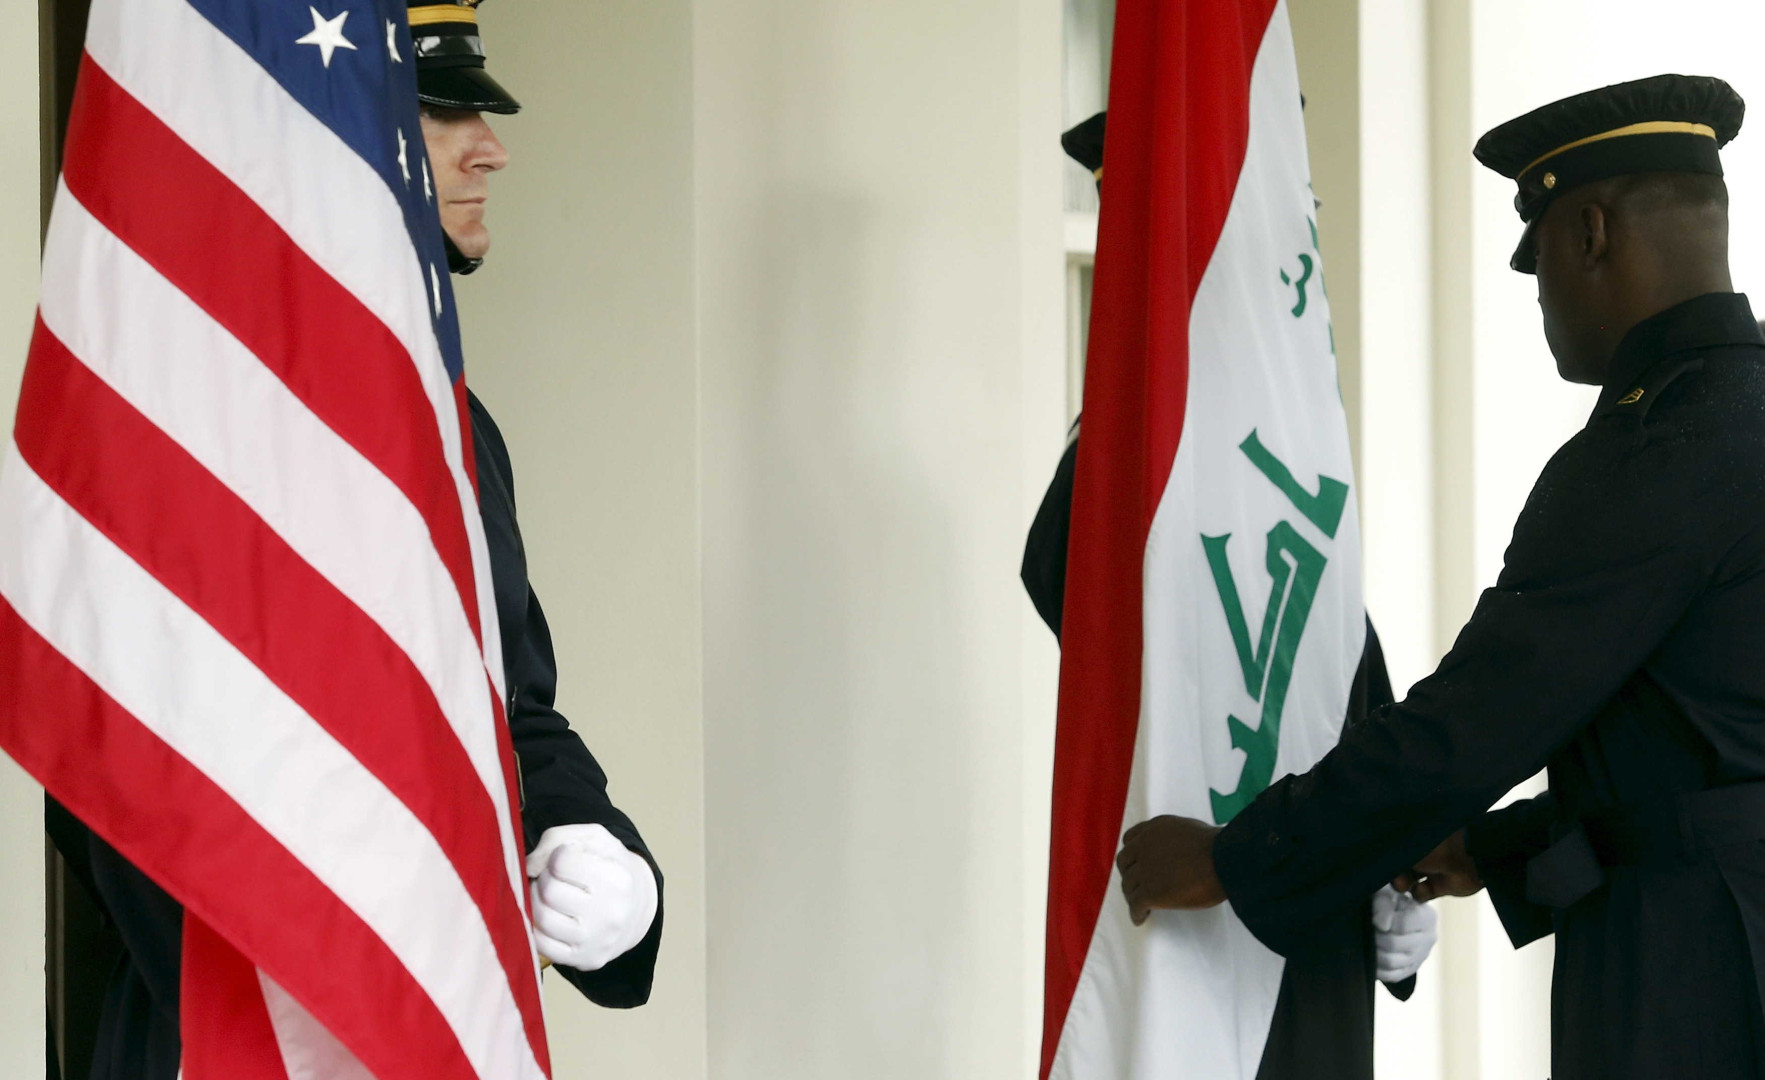 American report - The Iraqi delegation in Washington was under severe pressure from the Biden administration